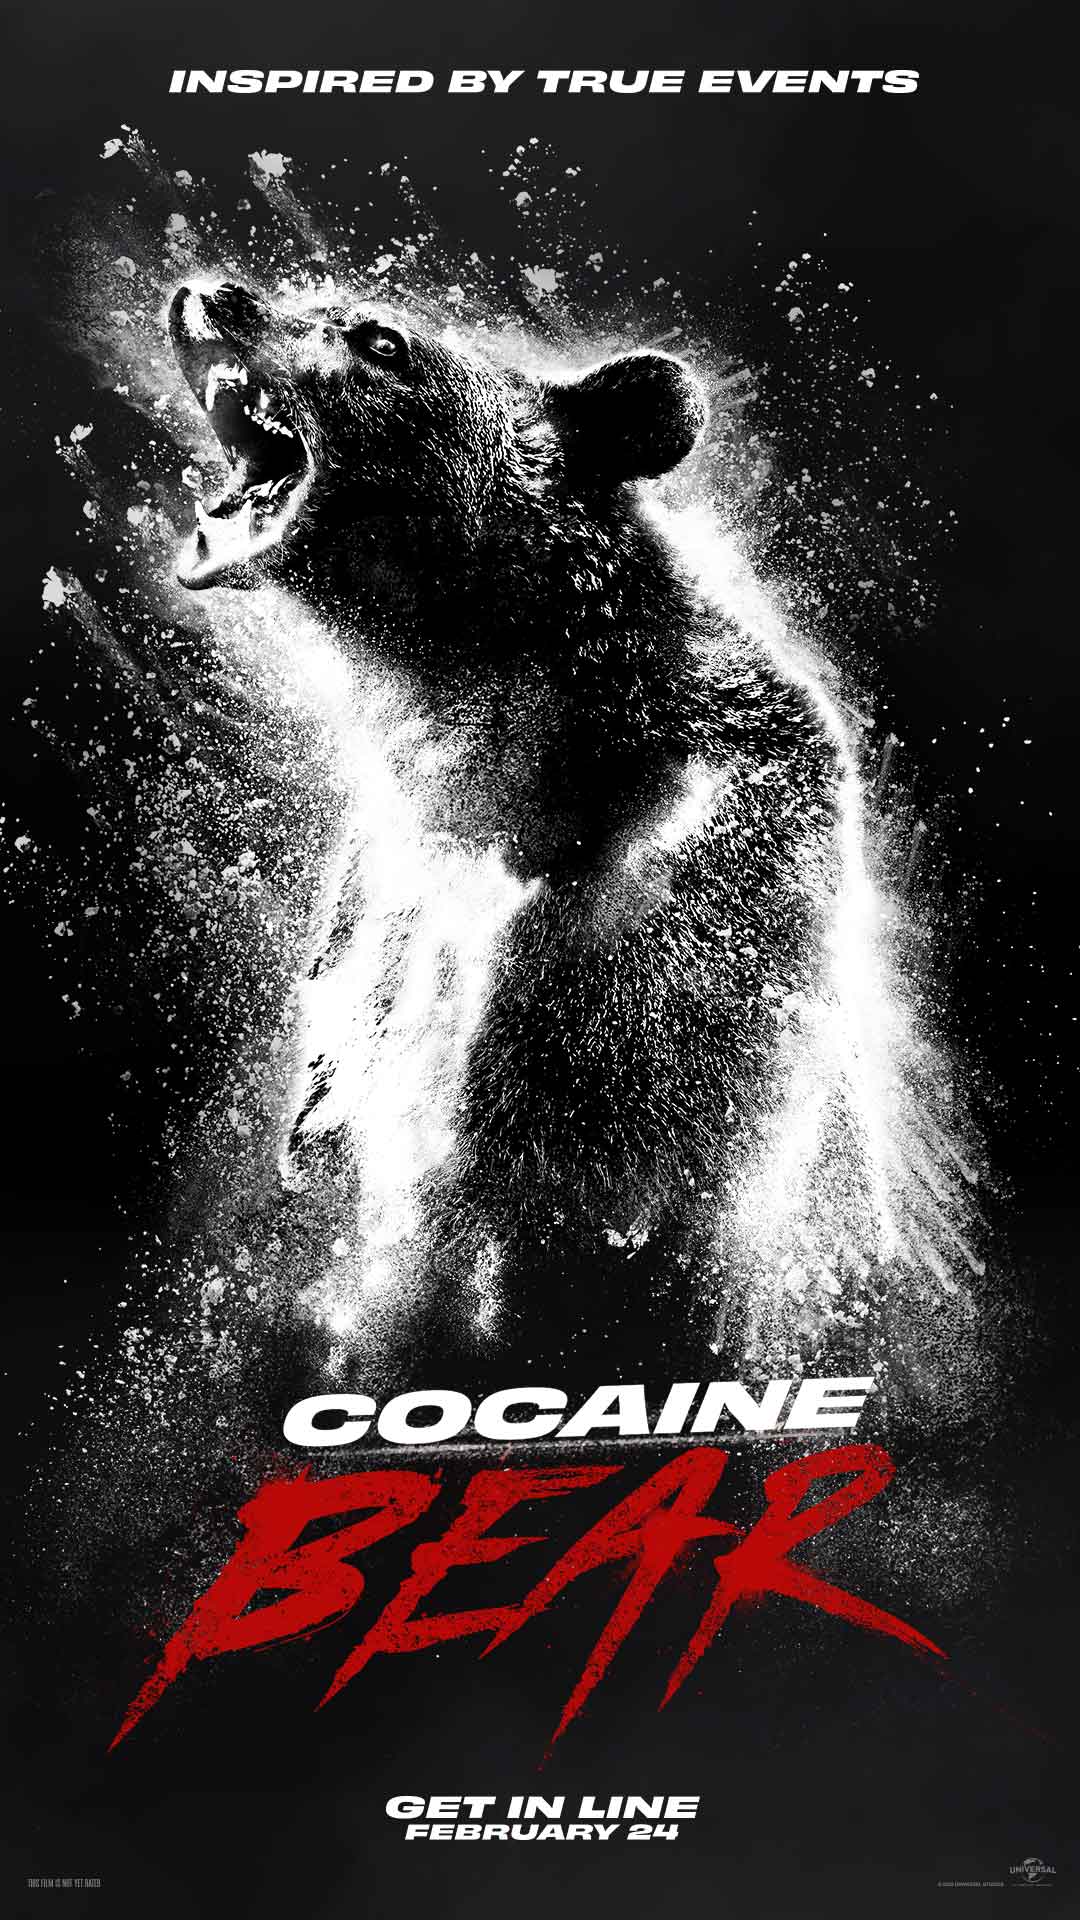 Keri Russell in Cocaine Bear trailer & poster